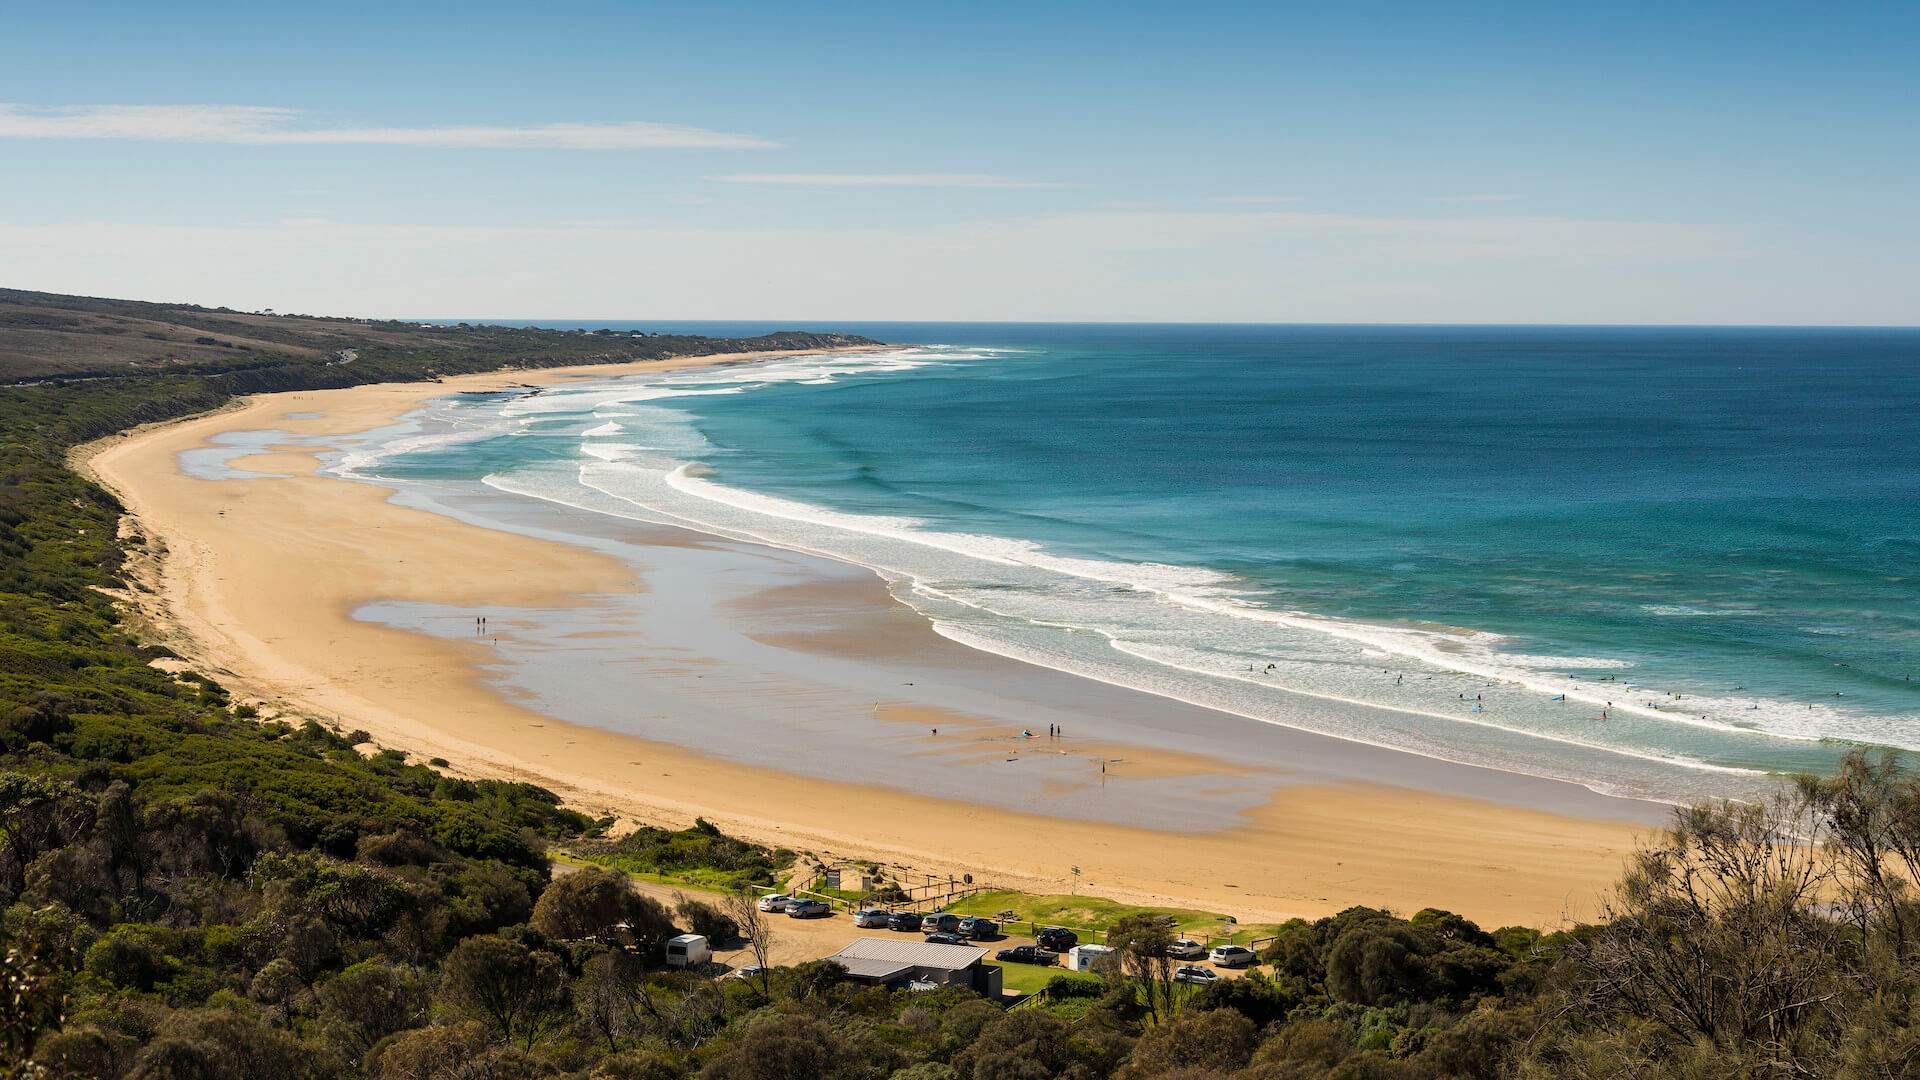 Anglesea Beach - one of the best beaches in Victoria